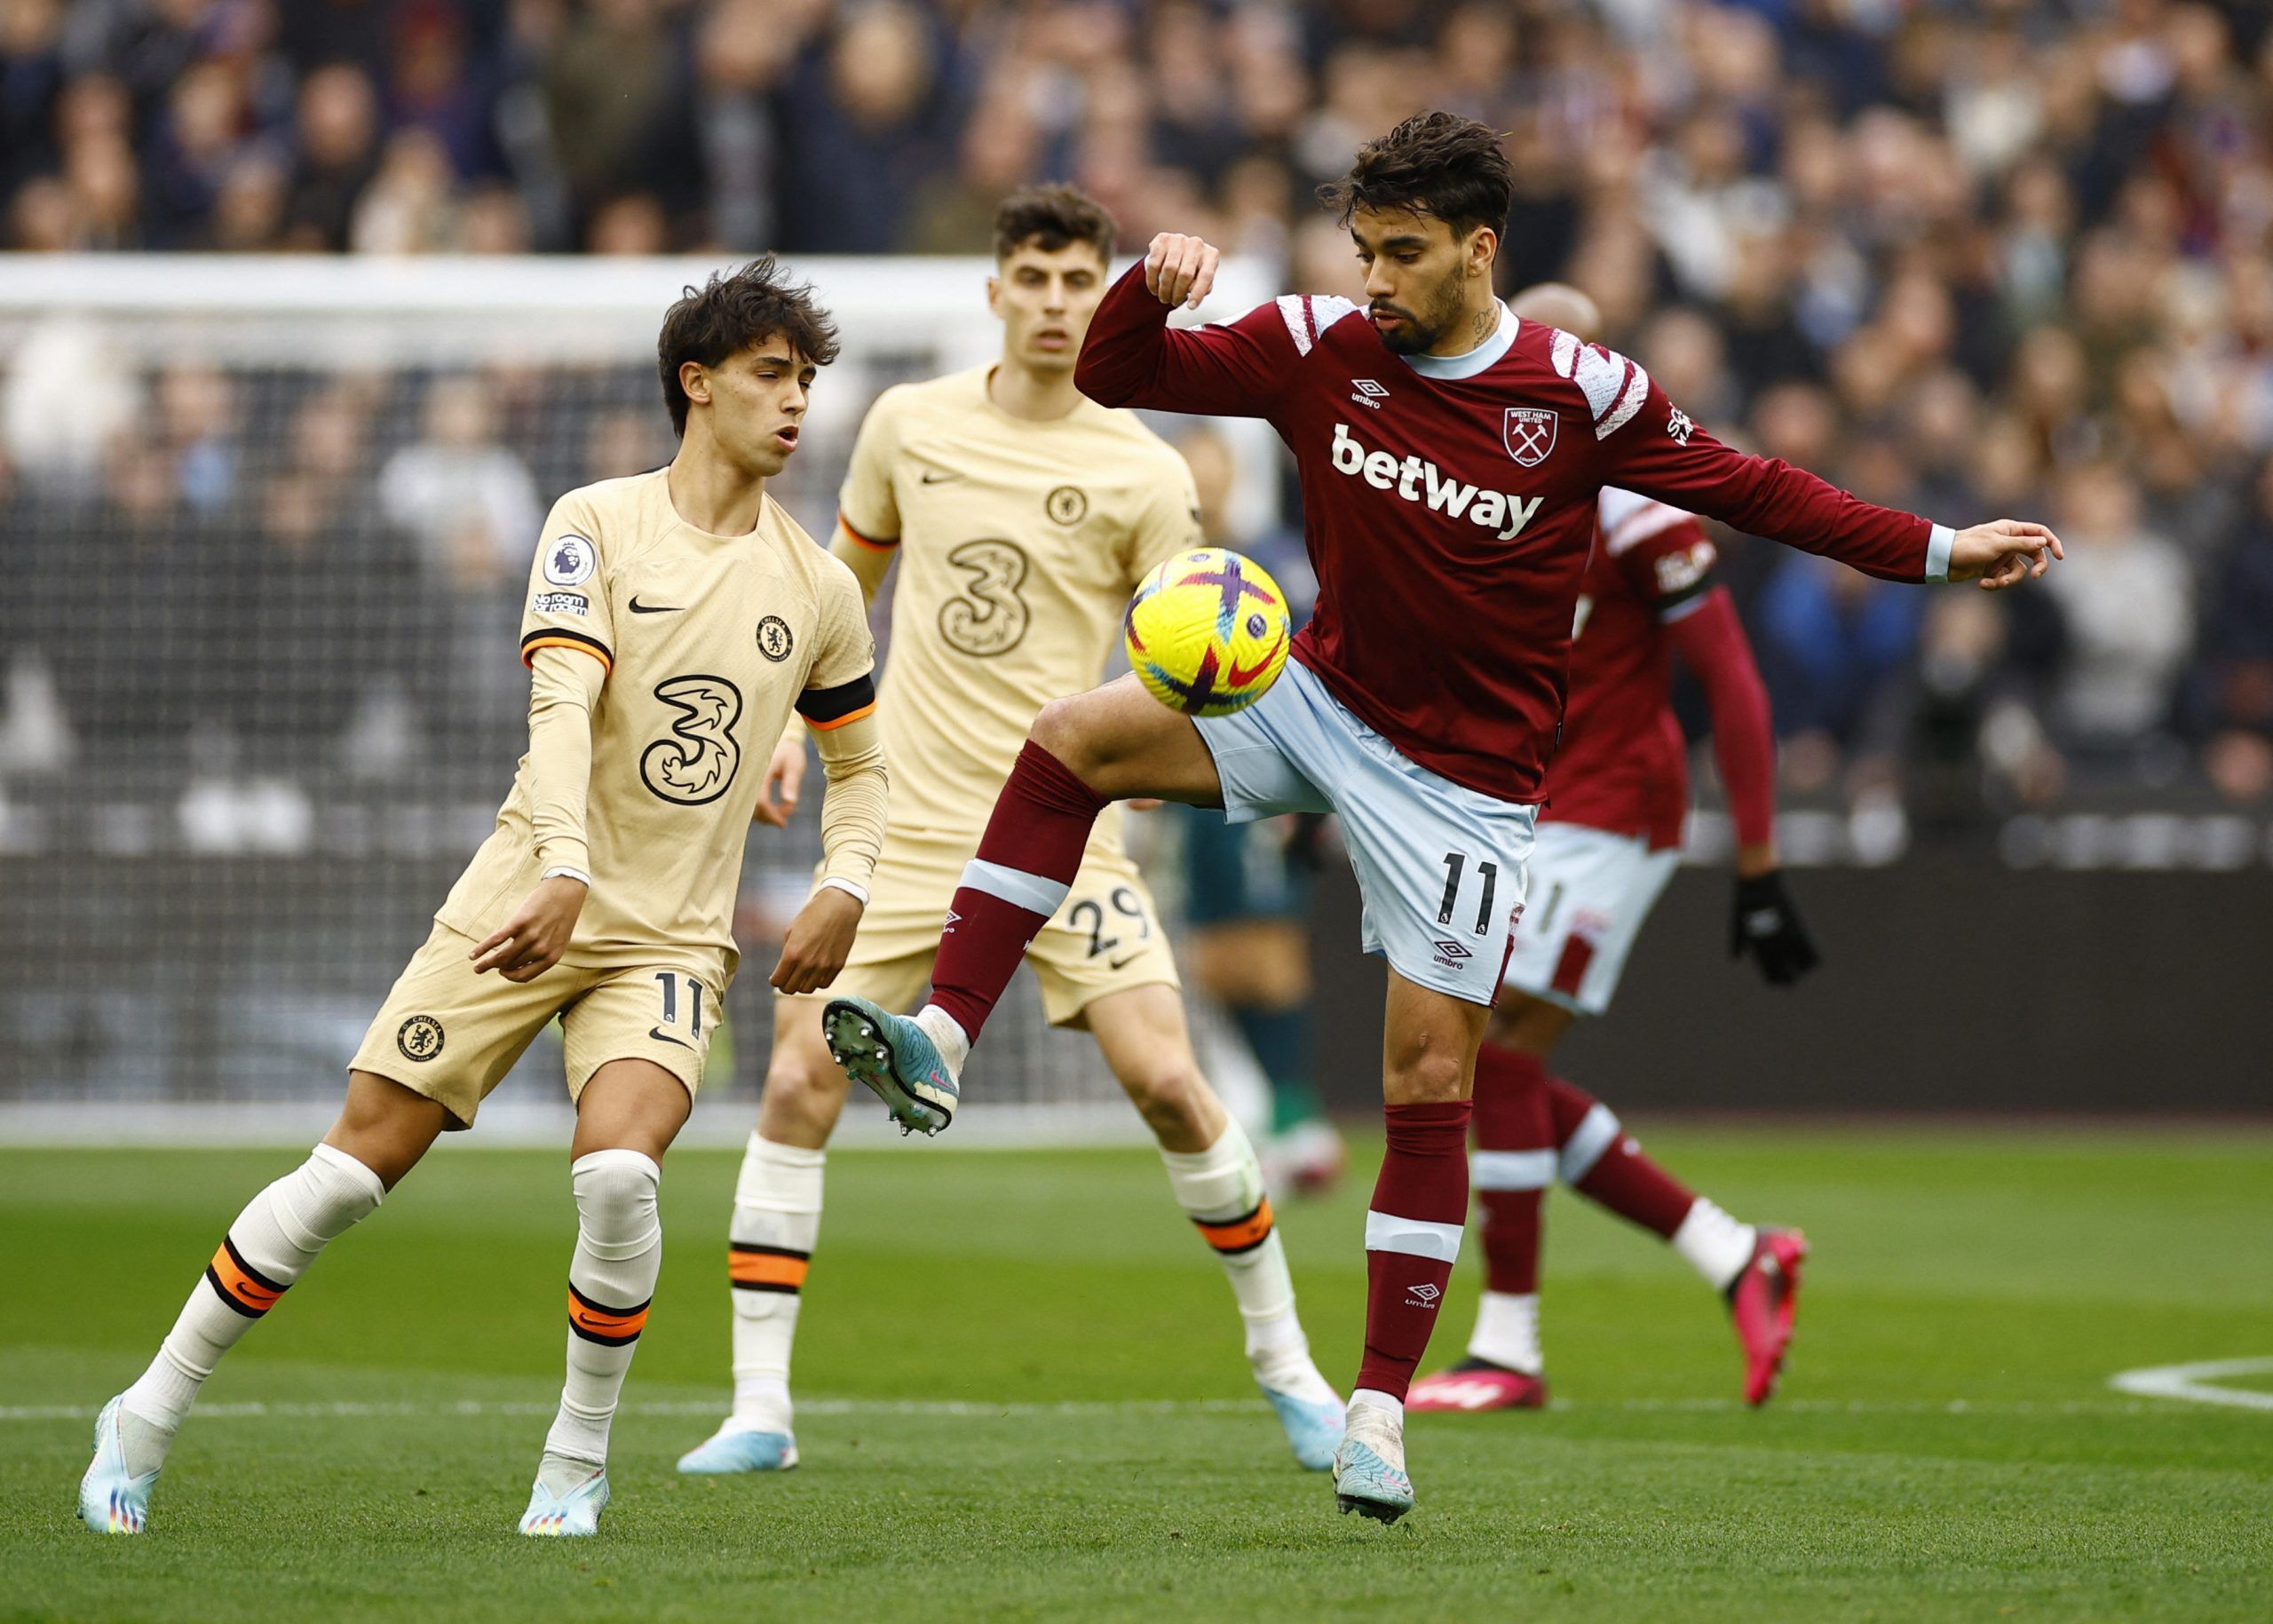 Soccer Football - Premier League - West Ham United v Chelsea - London Stadium, London, Britain - February 11, 2023 Chelsea's Joao Felix in action with West Ham United's Lucas Paqueta Action Images via Reuters/John Sibley EDITORIAL USE ONLY. No use with unauthorized audio, video, data, fixture lists, club/league logos or 'live' services. Online in-match use limited to 75 images, no video emulation. No use in betting, games or single club /league/player publications.  Please contact your account r